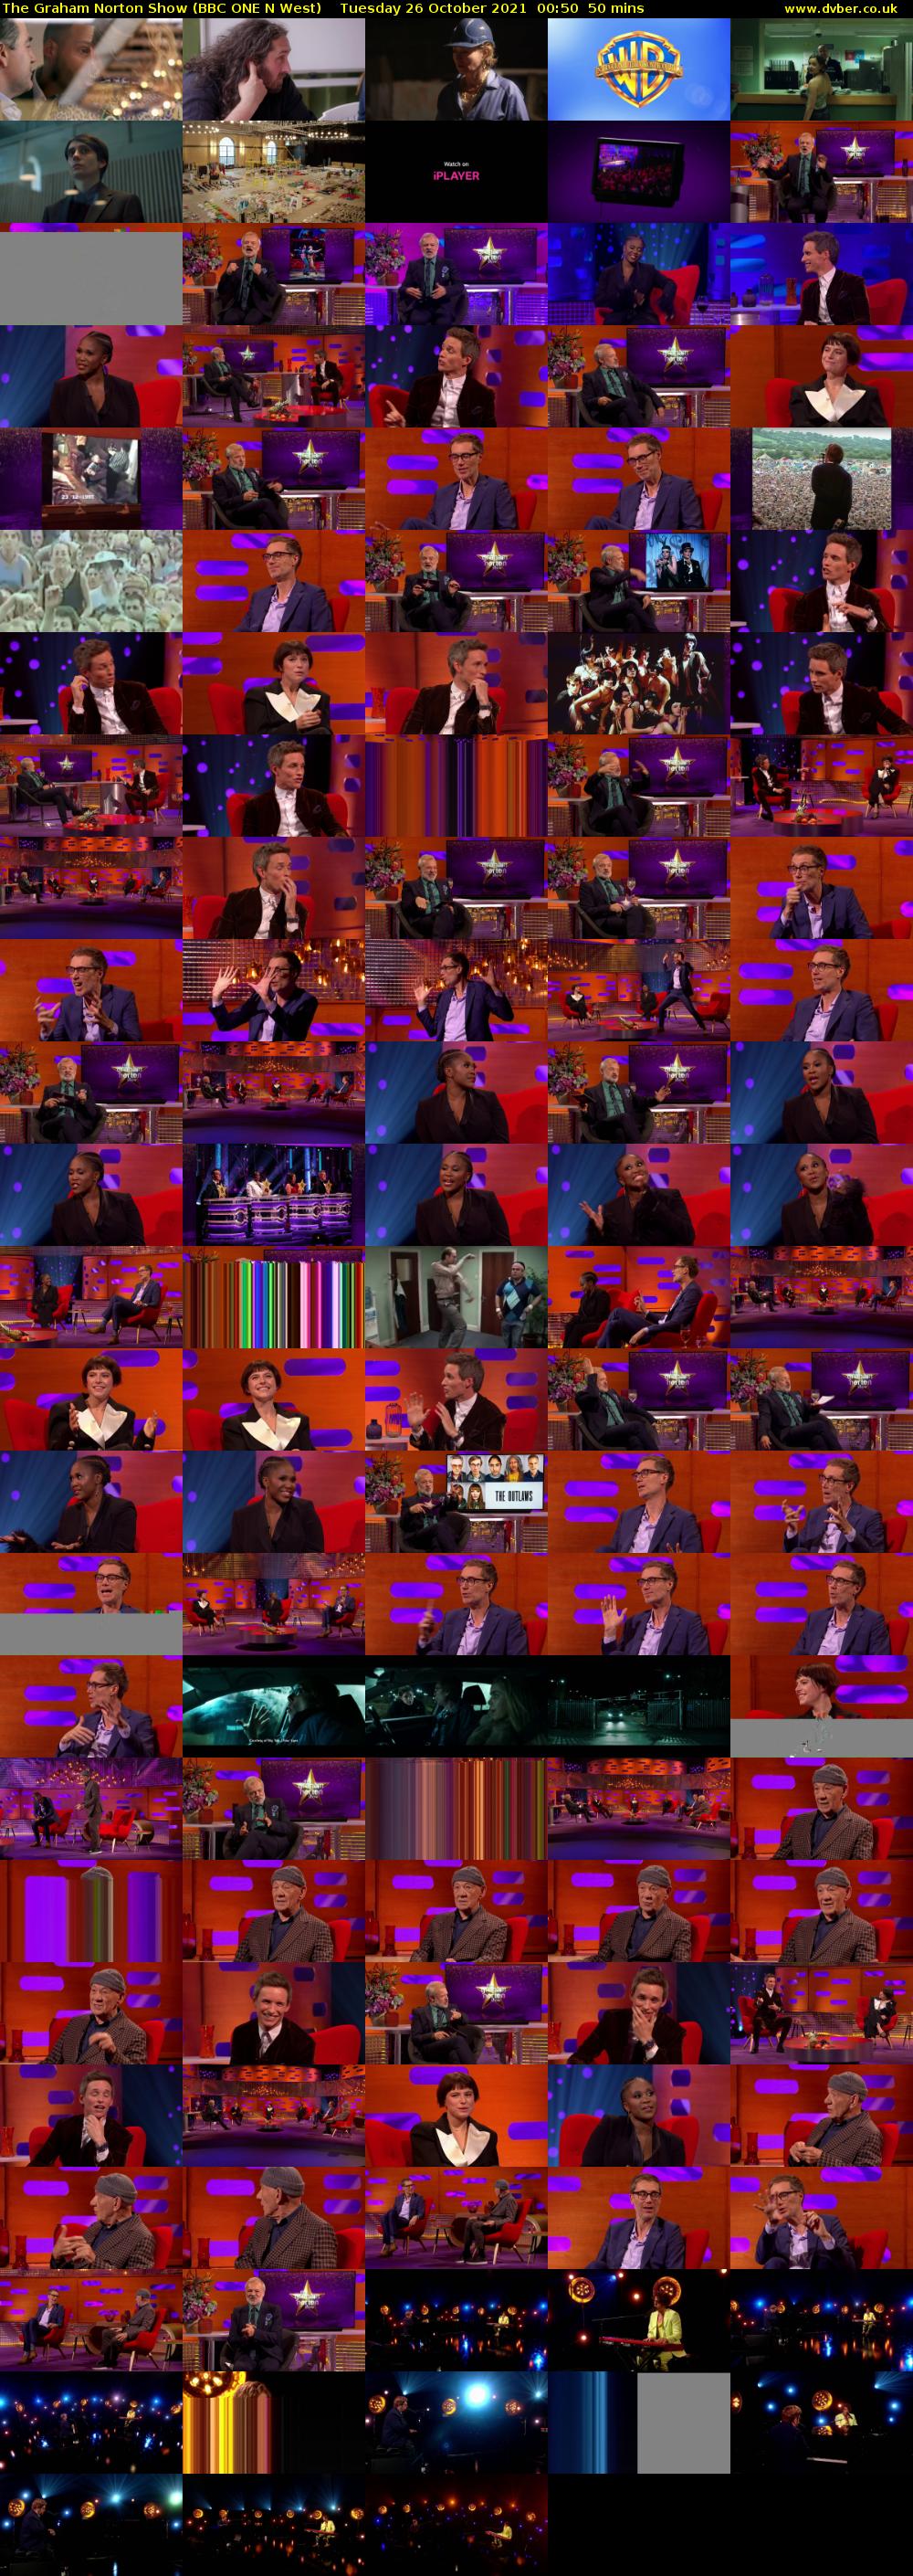 The Graham Norton Show (BBC ONE N West) Tuesday 26 October 2021 00:50 - 01:40